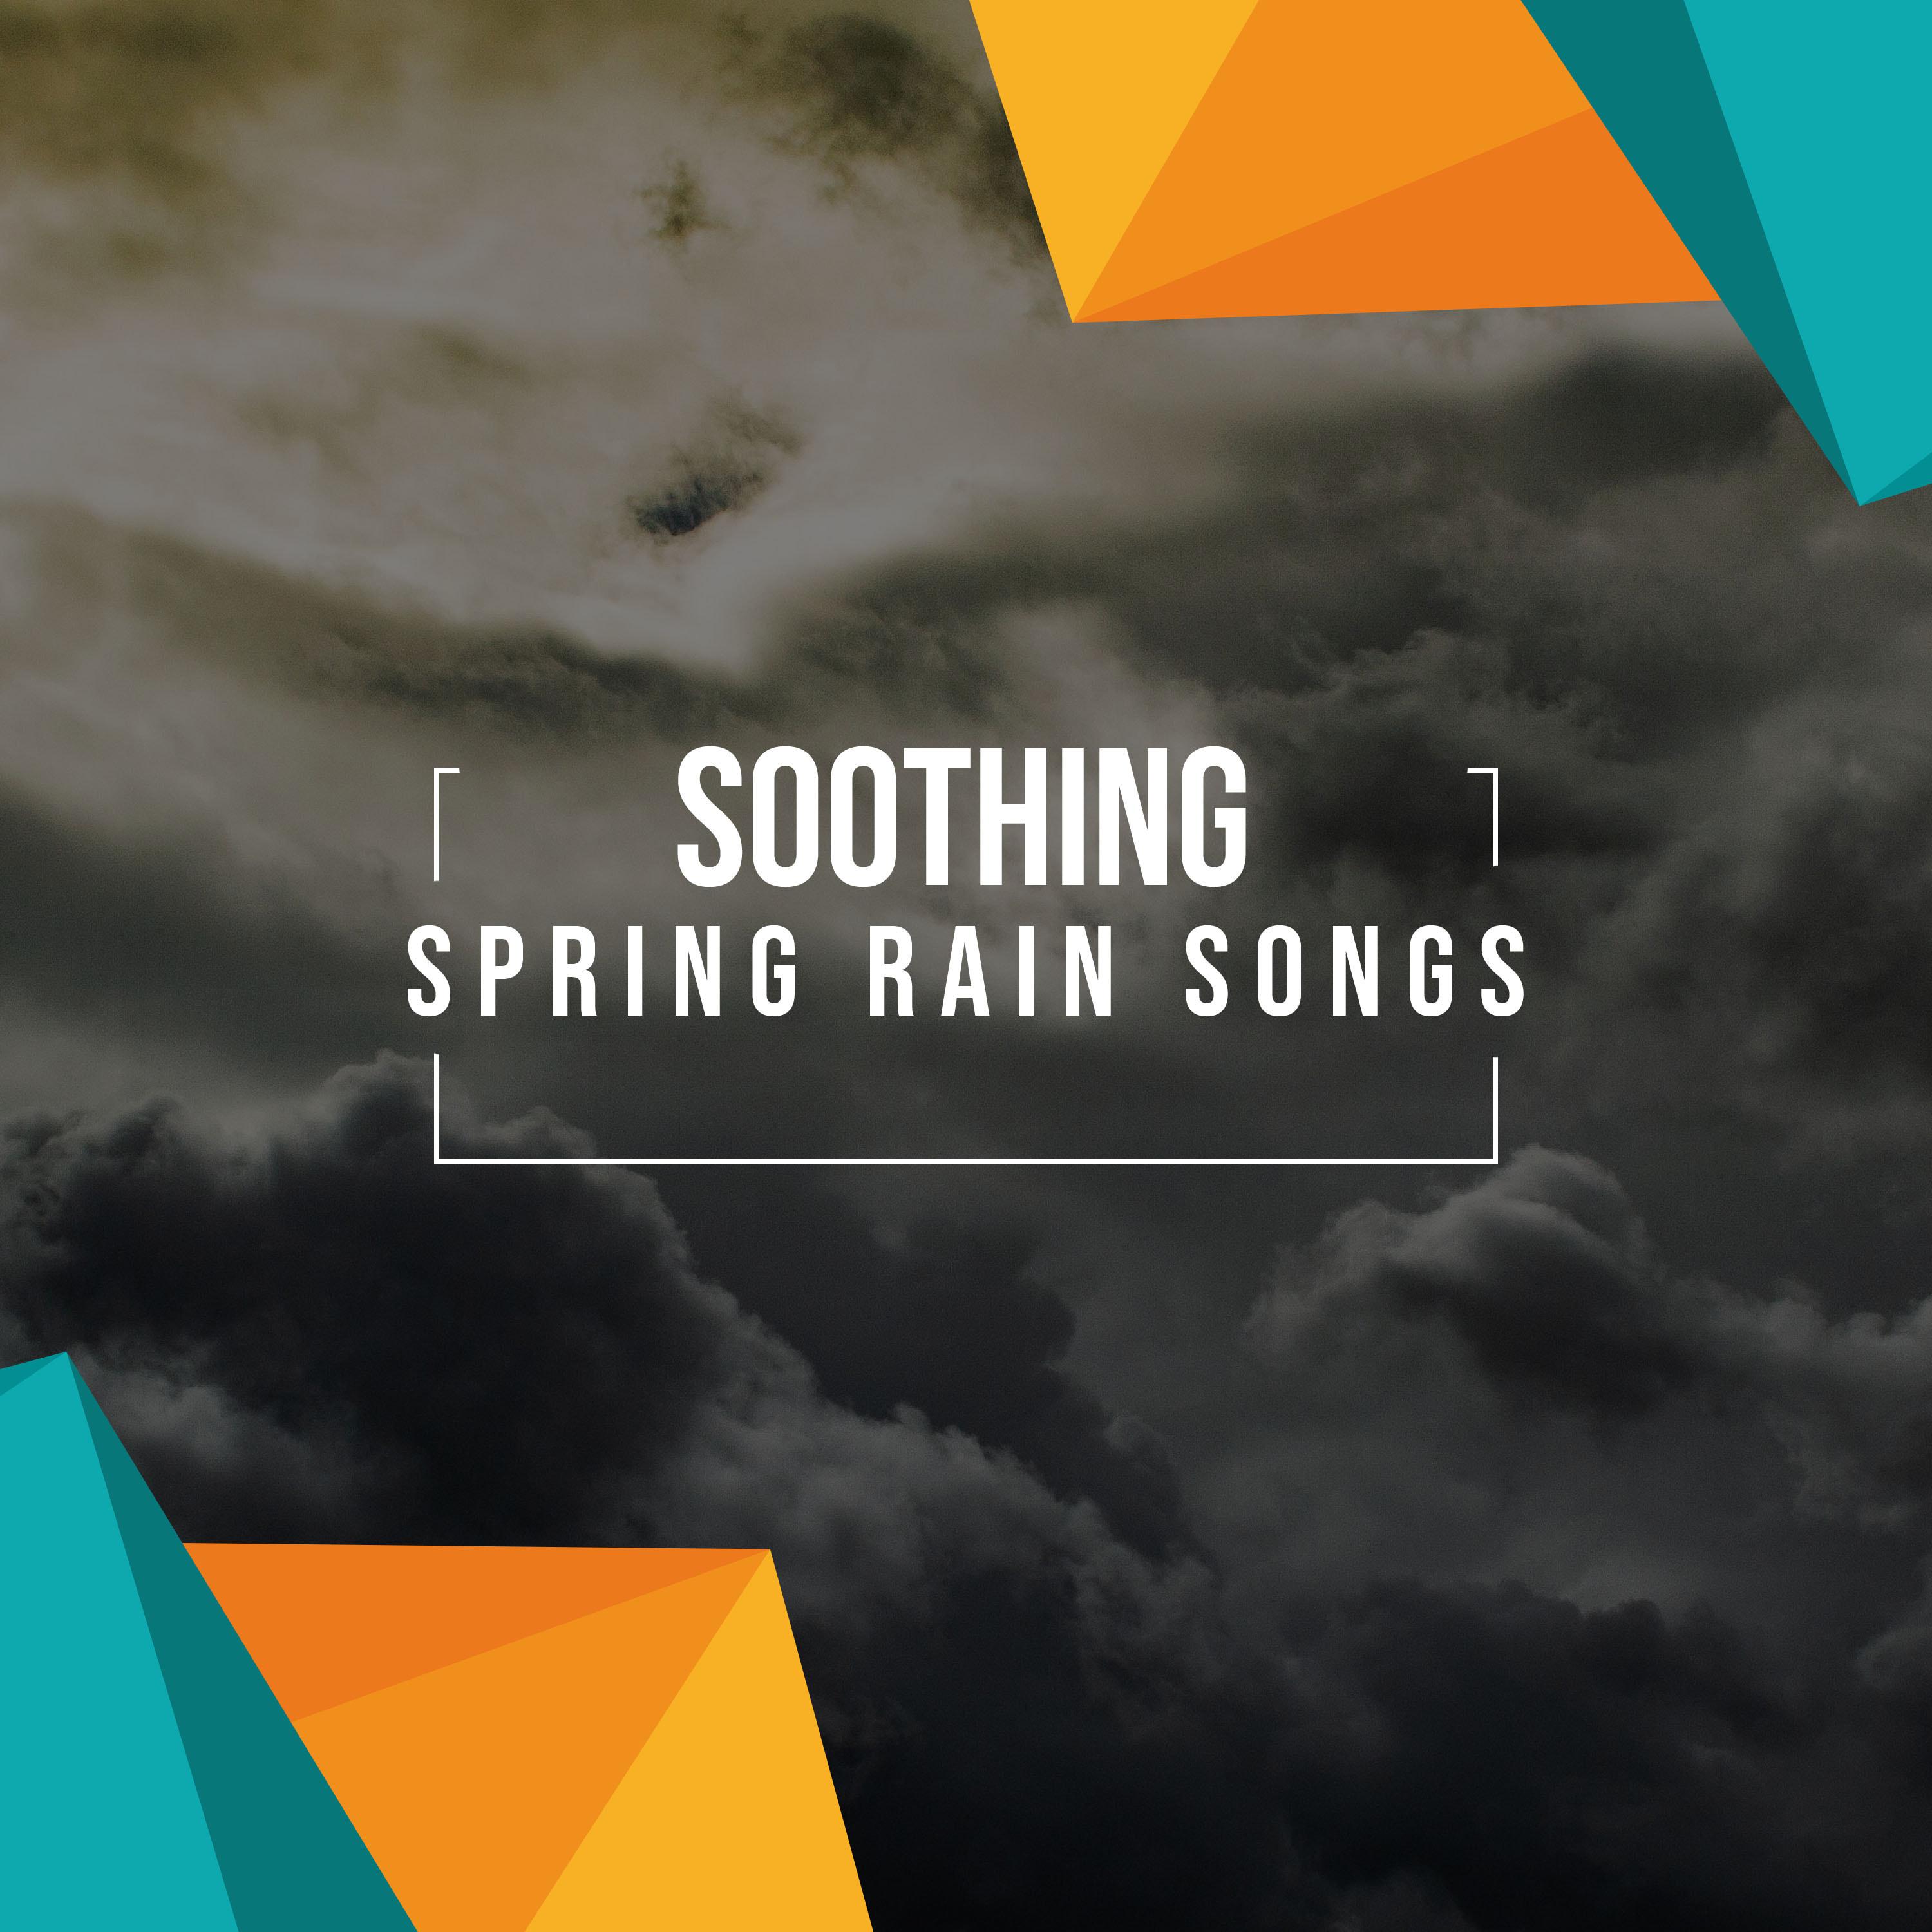 #20 Soothing Spring Rain Songs for Yoga or Spa